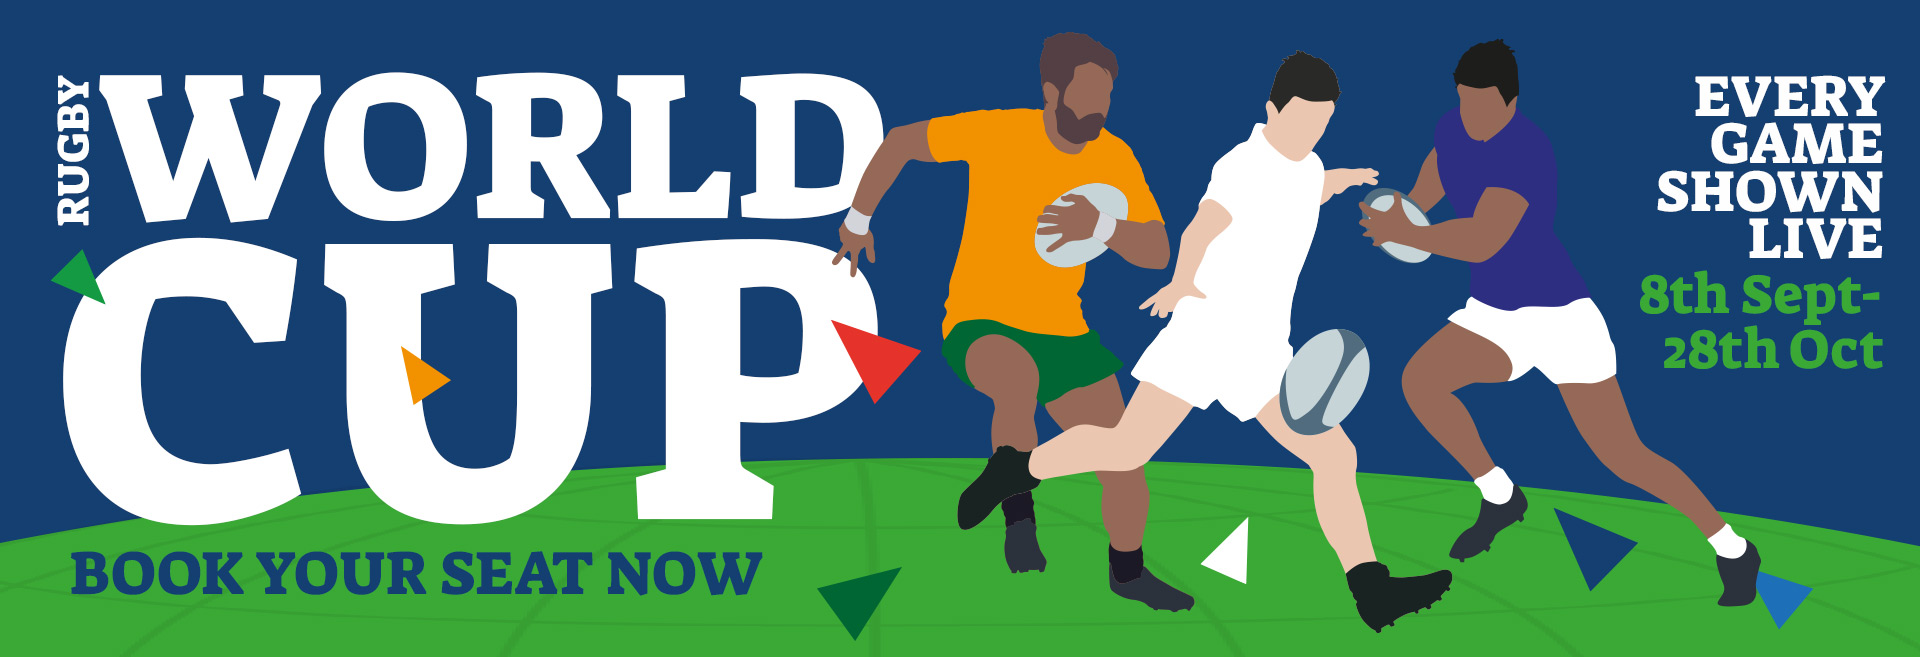 Watch the Rugby World Cup at The Builder's Arms